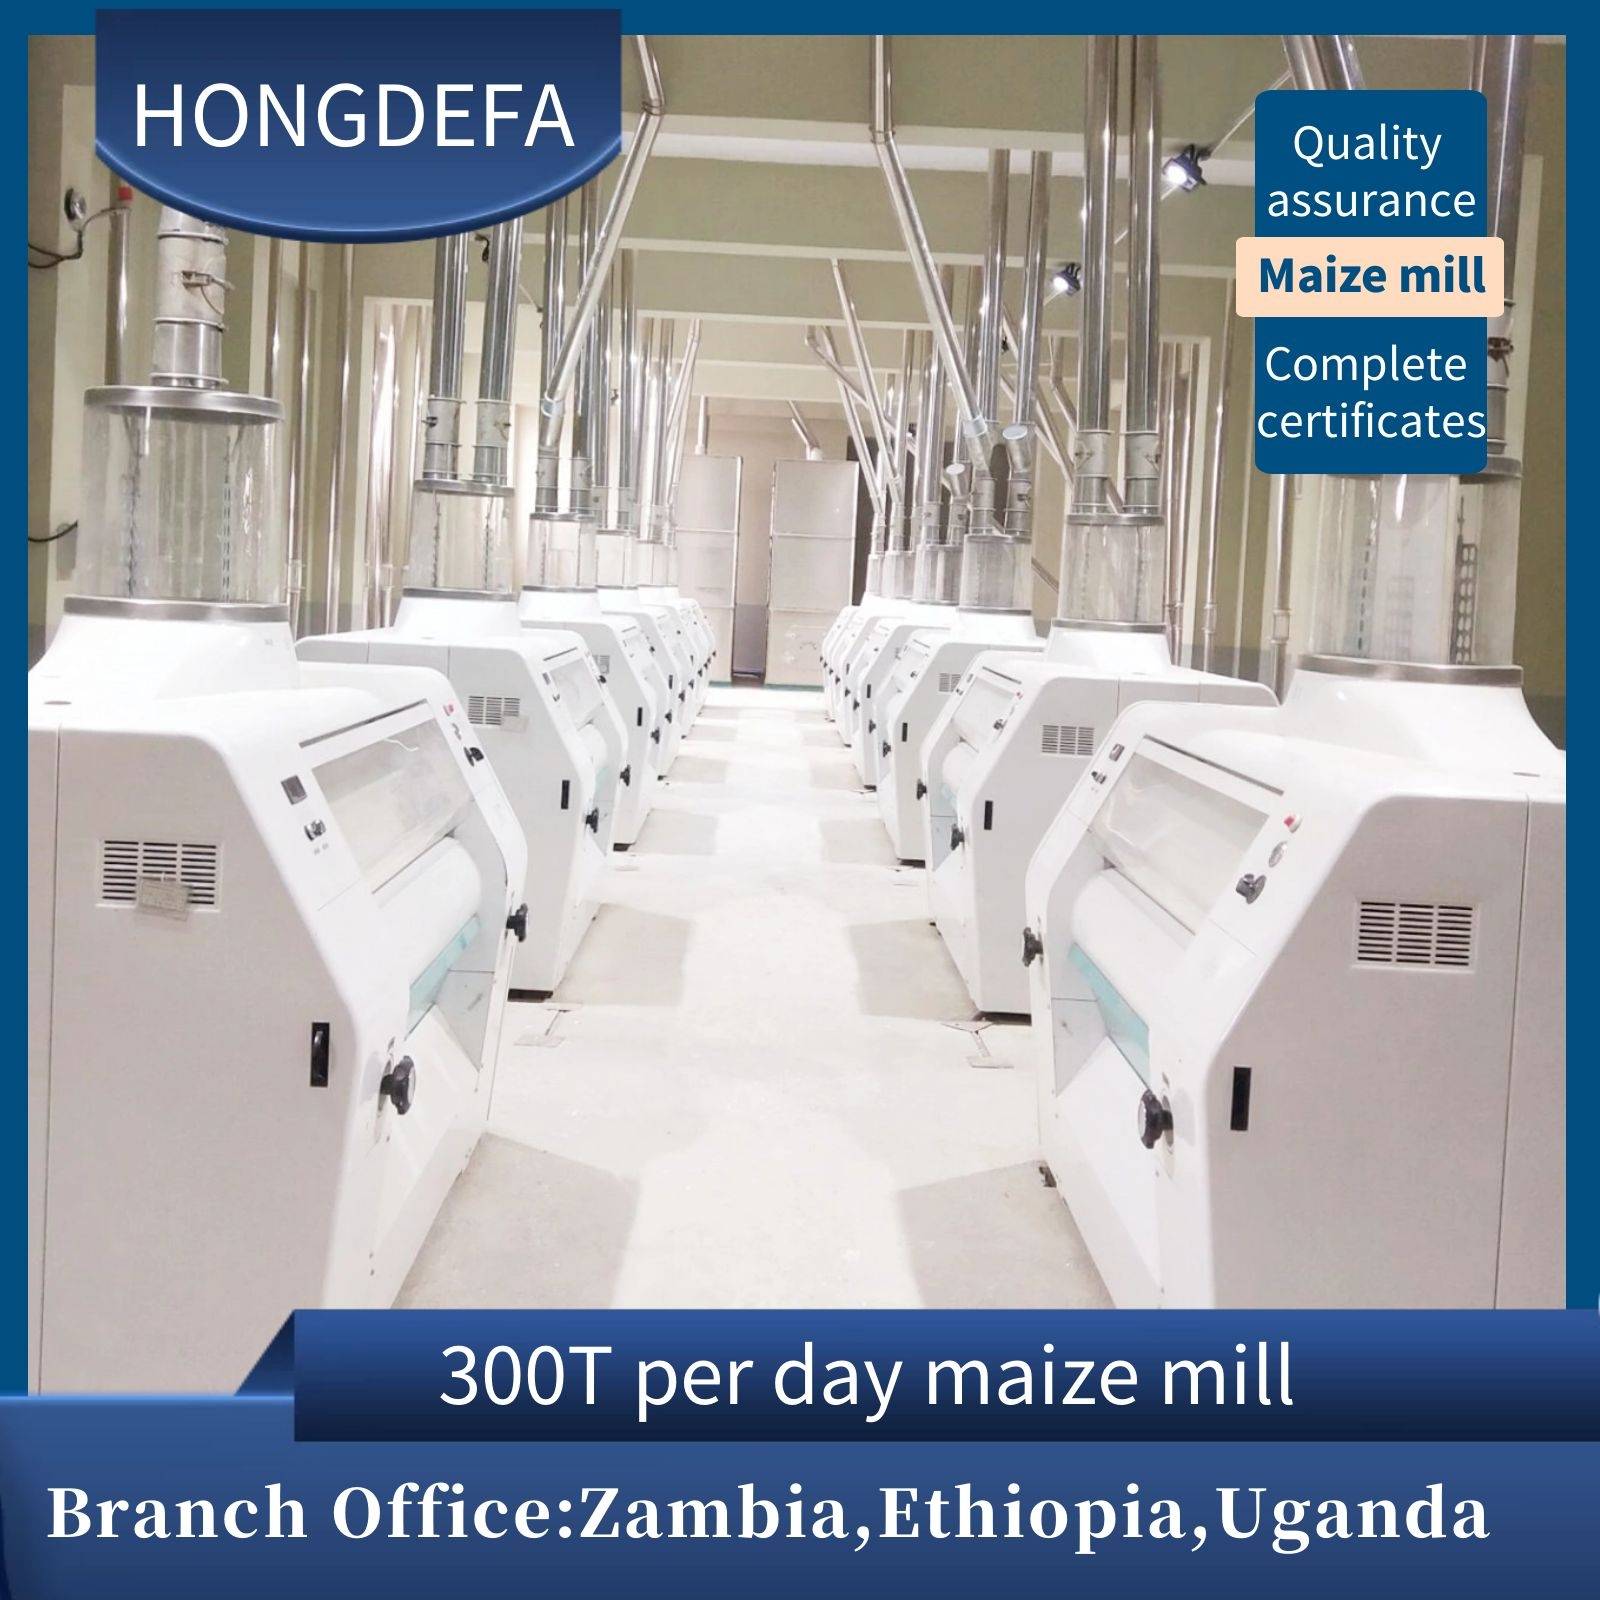 How to invest and build your own mill — —Why chose Hongdefa machinery?